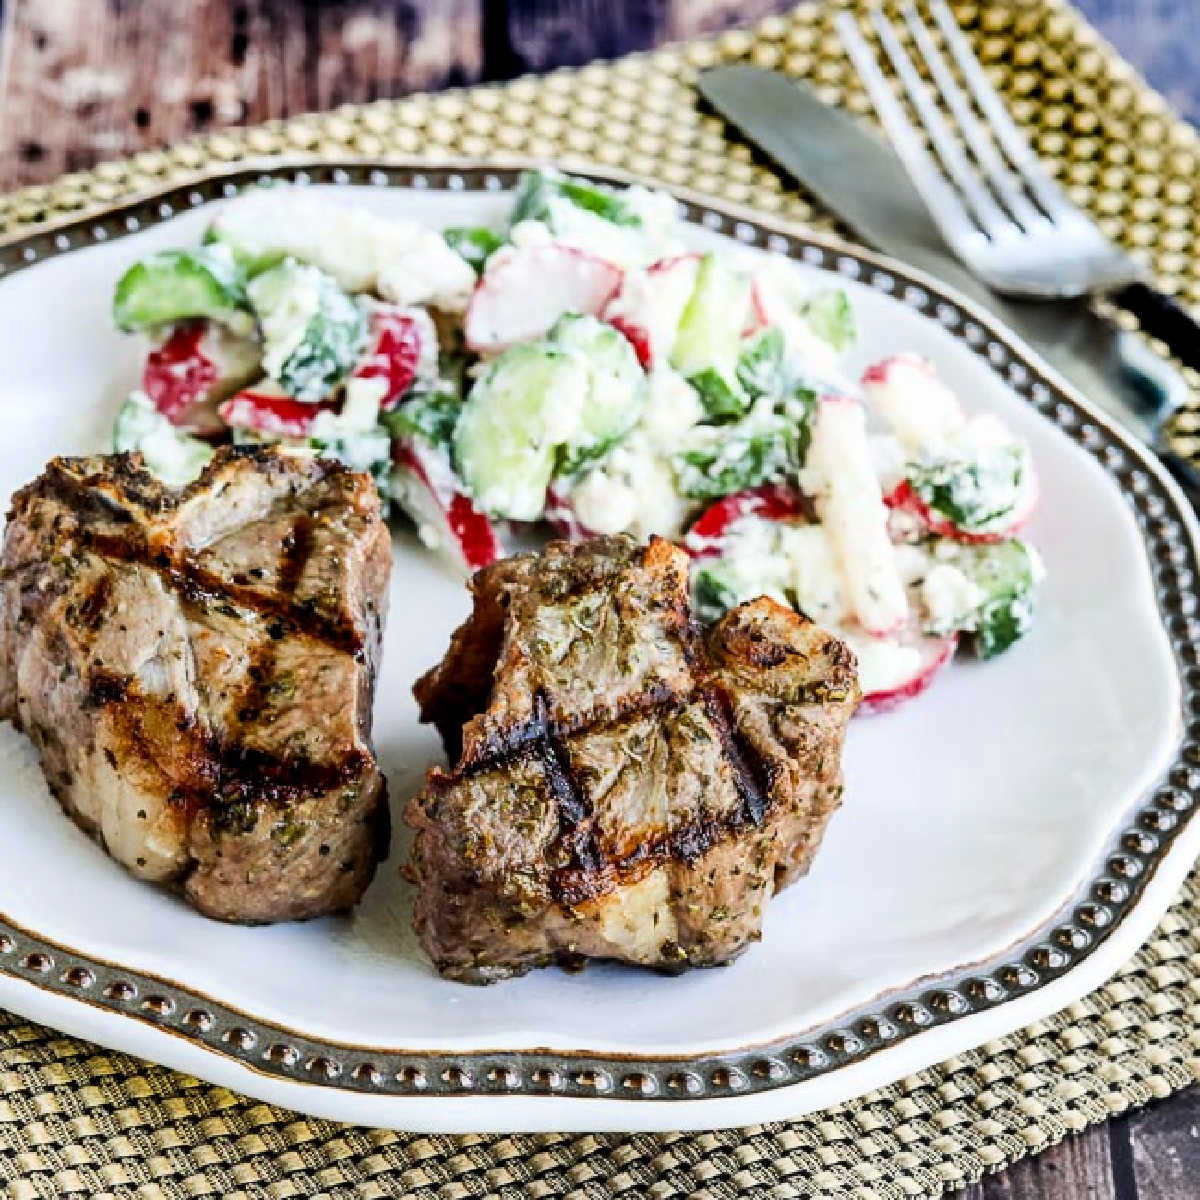 Square image for Grilled Lamb Chops with Garlic and Herbs, shown on plate with salad.